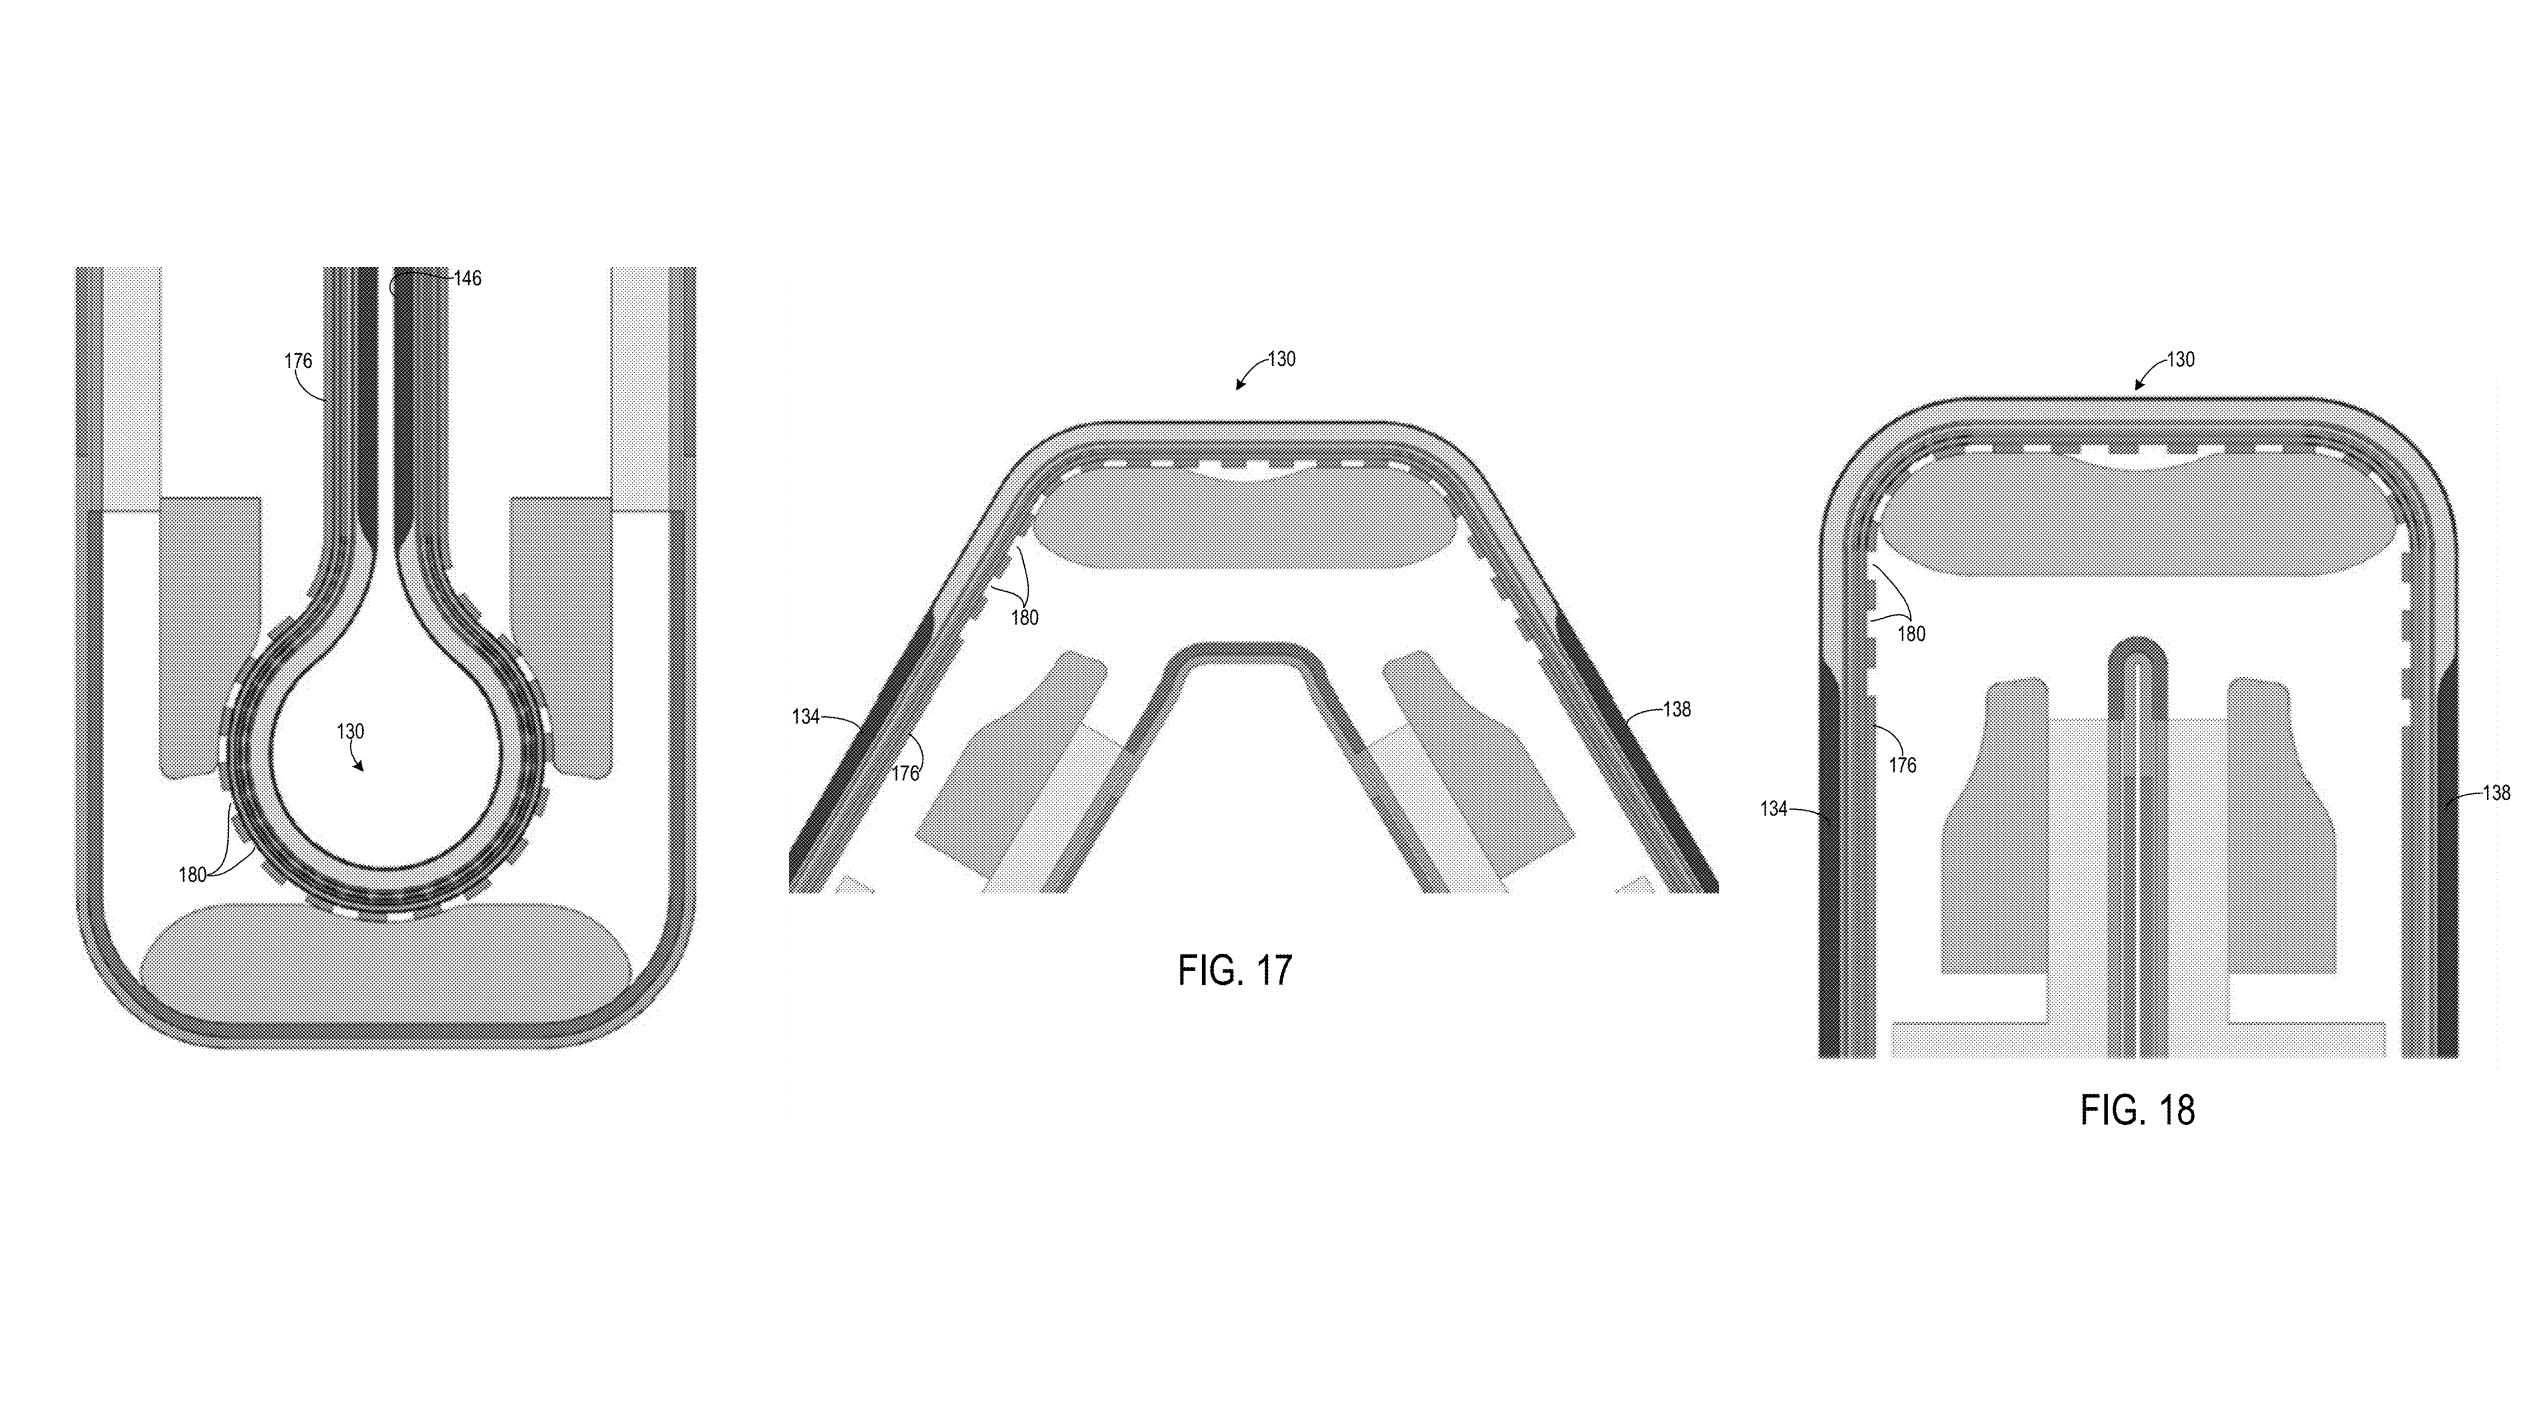 Microsoft's patent application for a foldable display